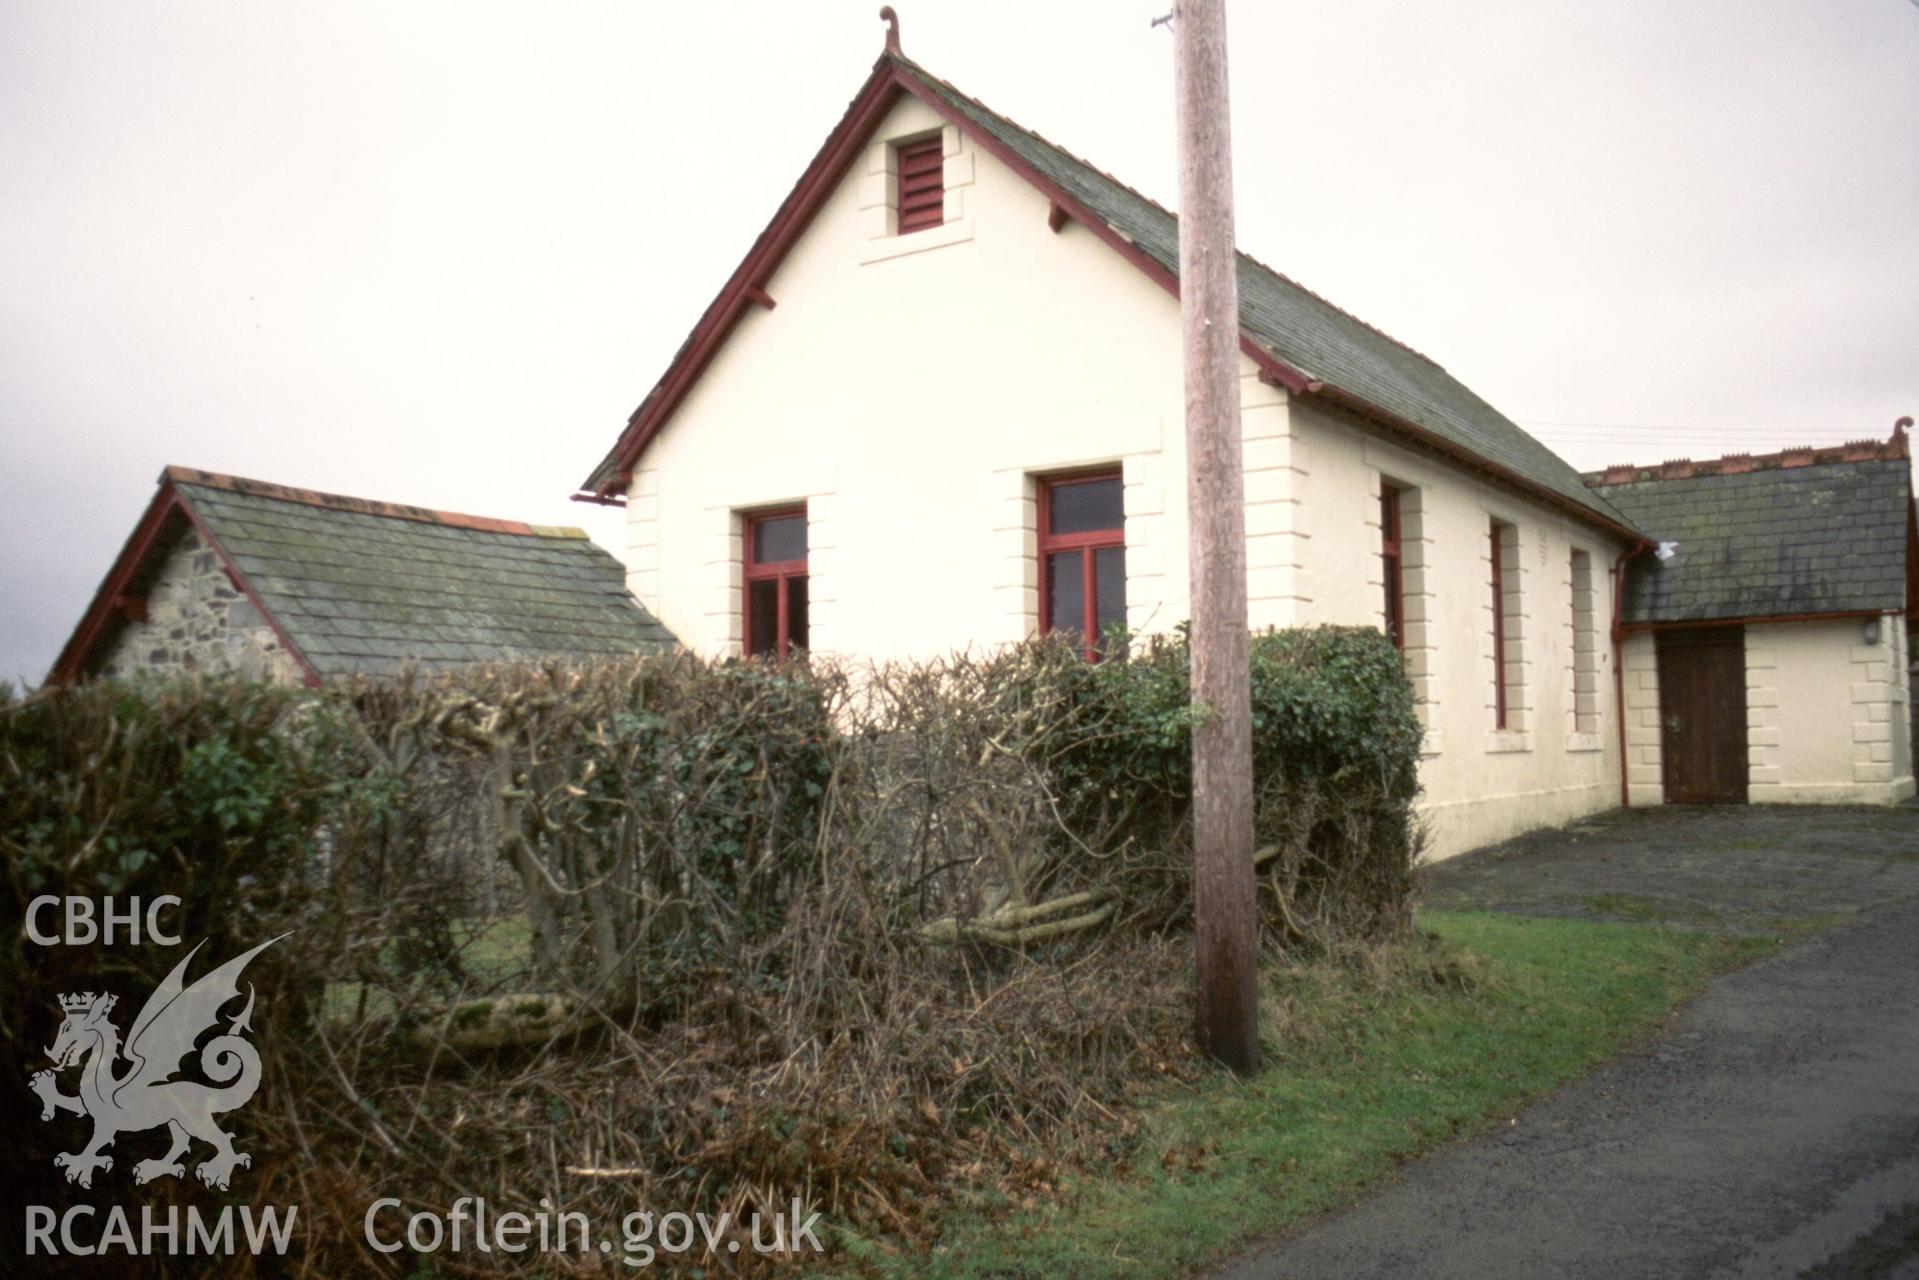 Exterior, porch front, left gable elvations & adjoining outbuilding